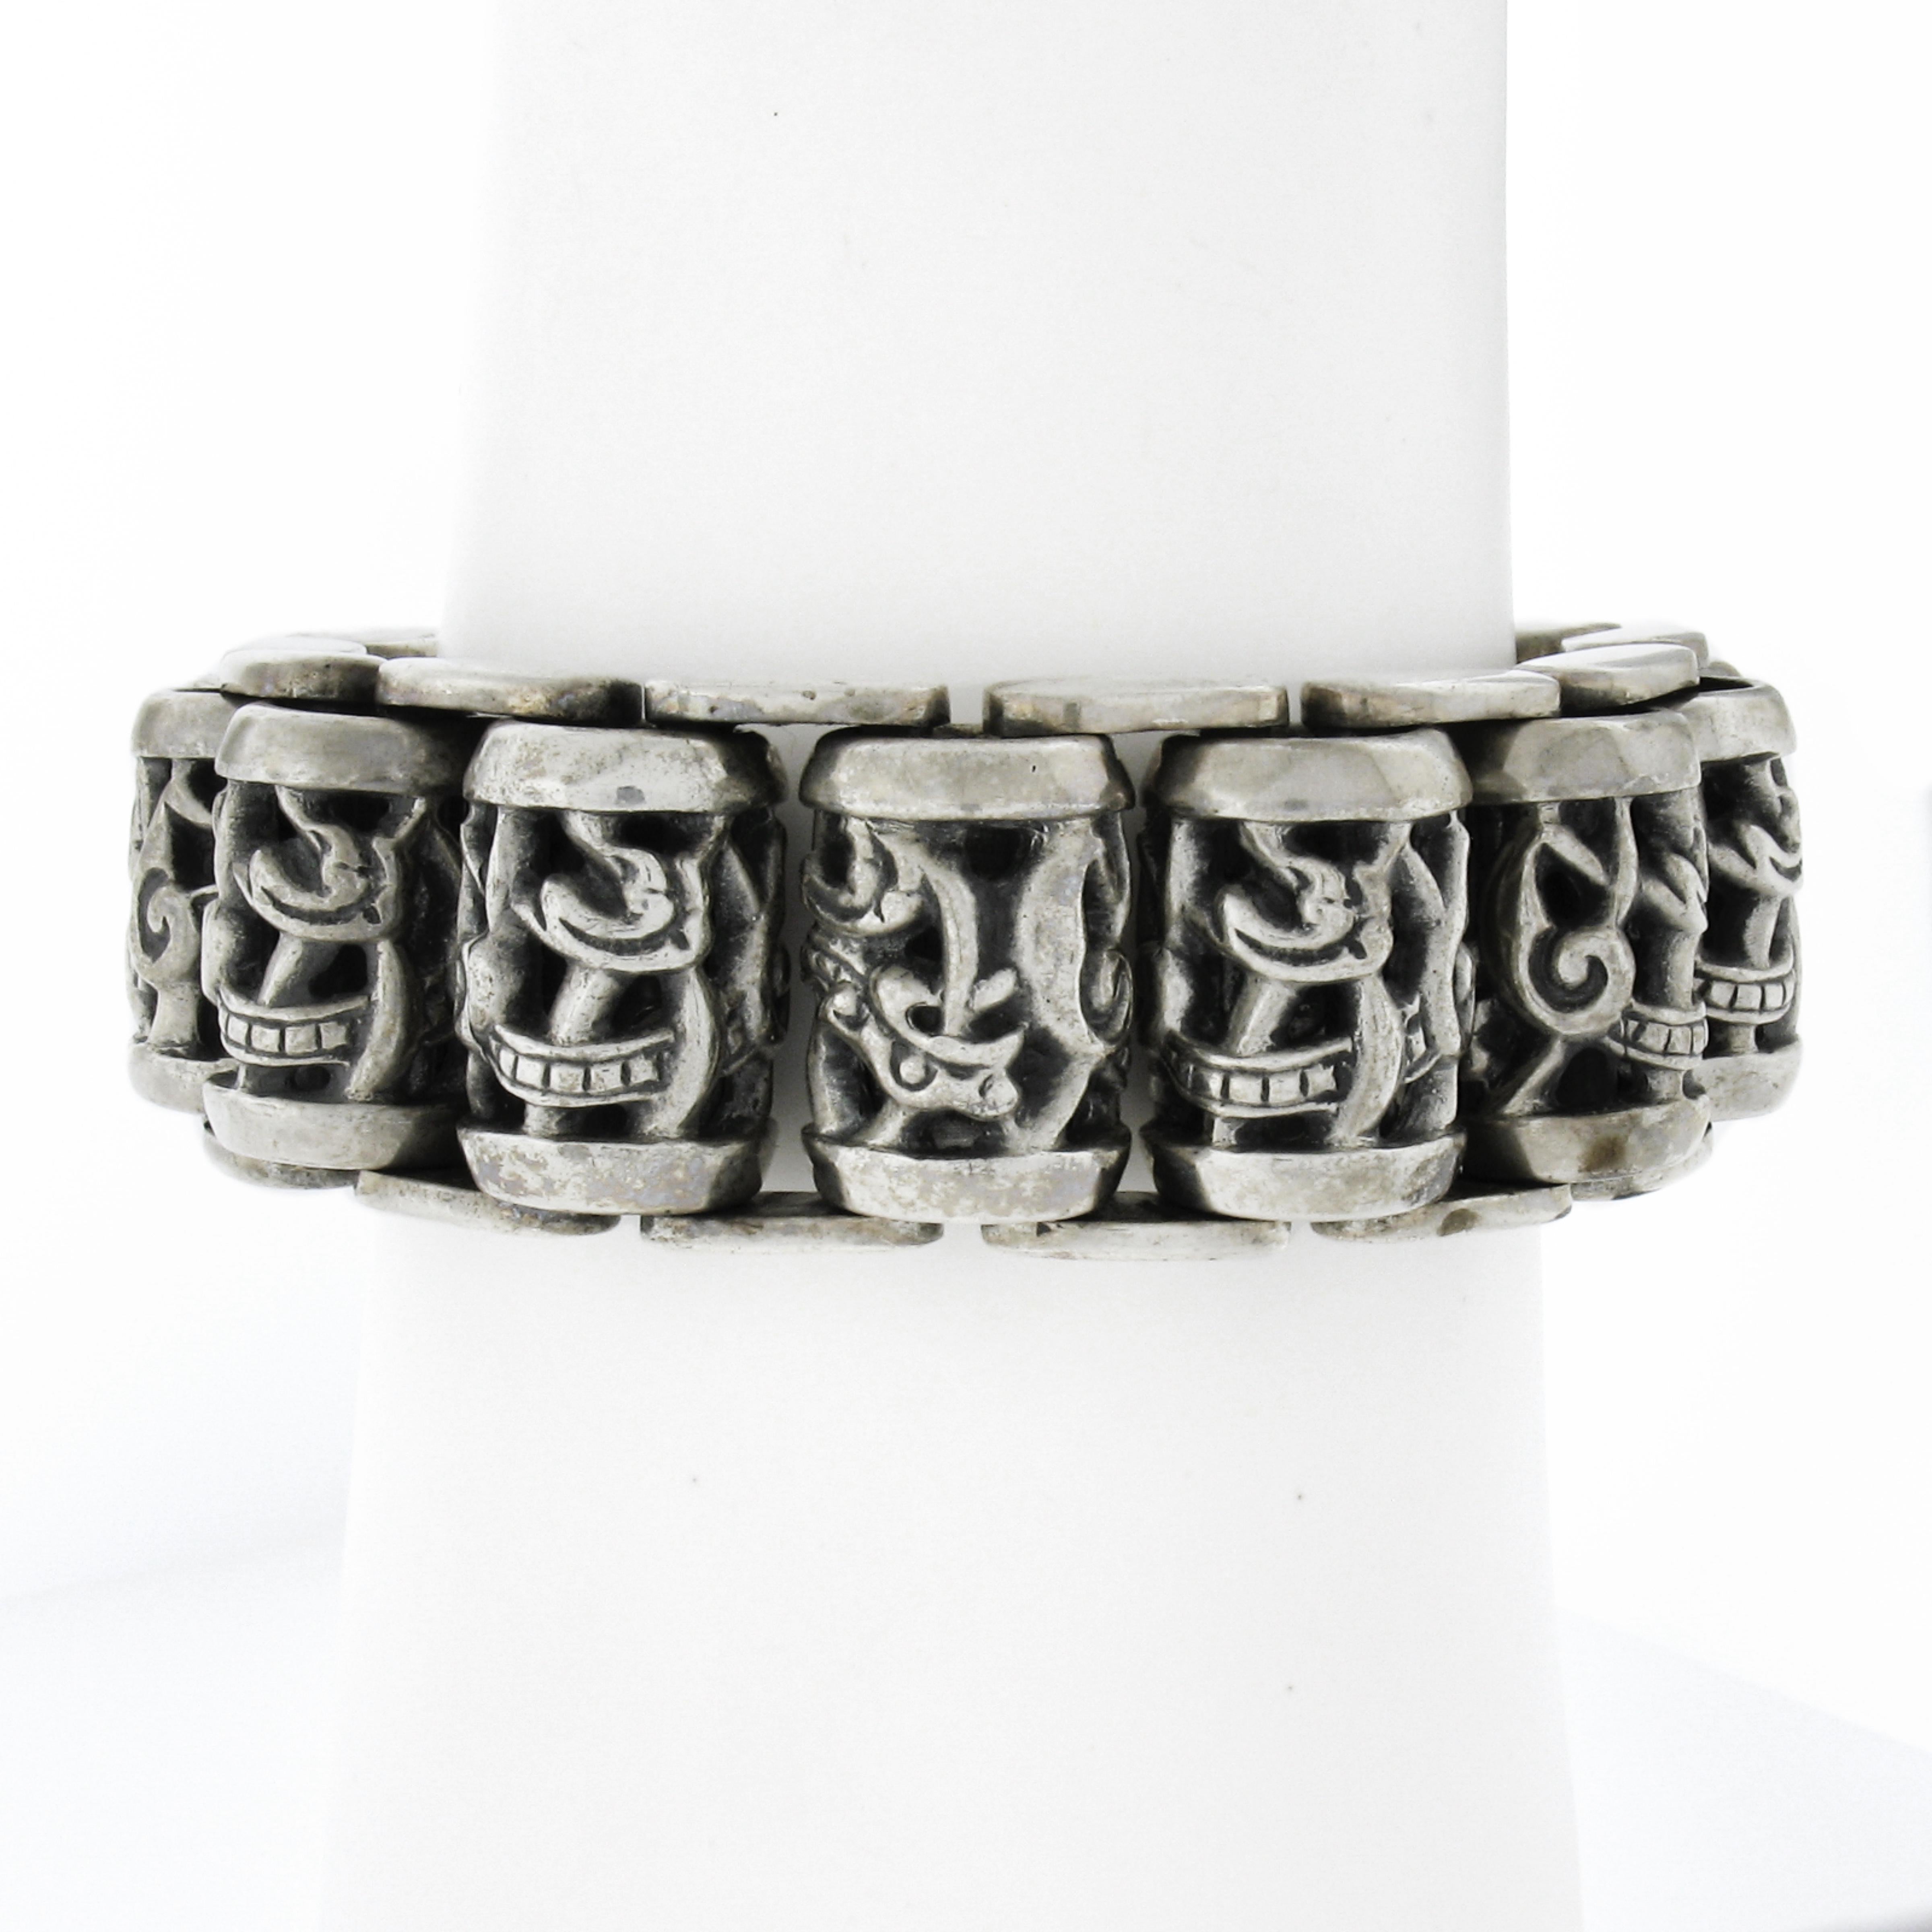 This bold statement piece by Chrome Hearts is from their Celtic collection and features roller cylinder links that are detailed with dragons and open designs throughout. The bracelet is heavy, wide and is guaranteed to stand out with its bold